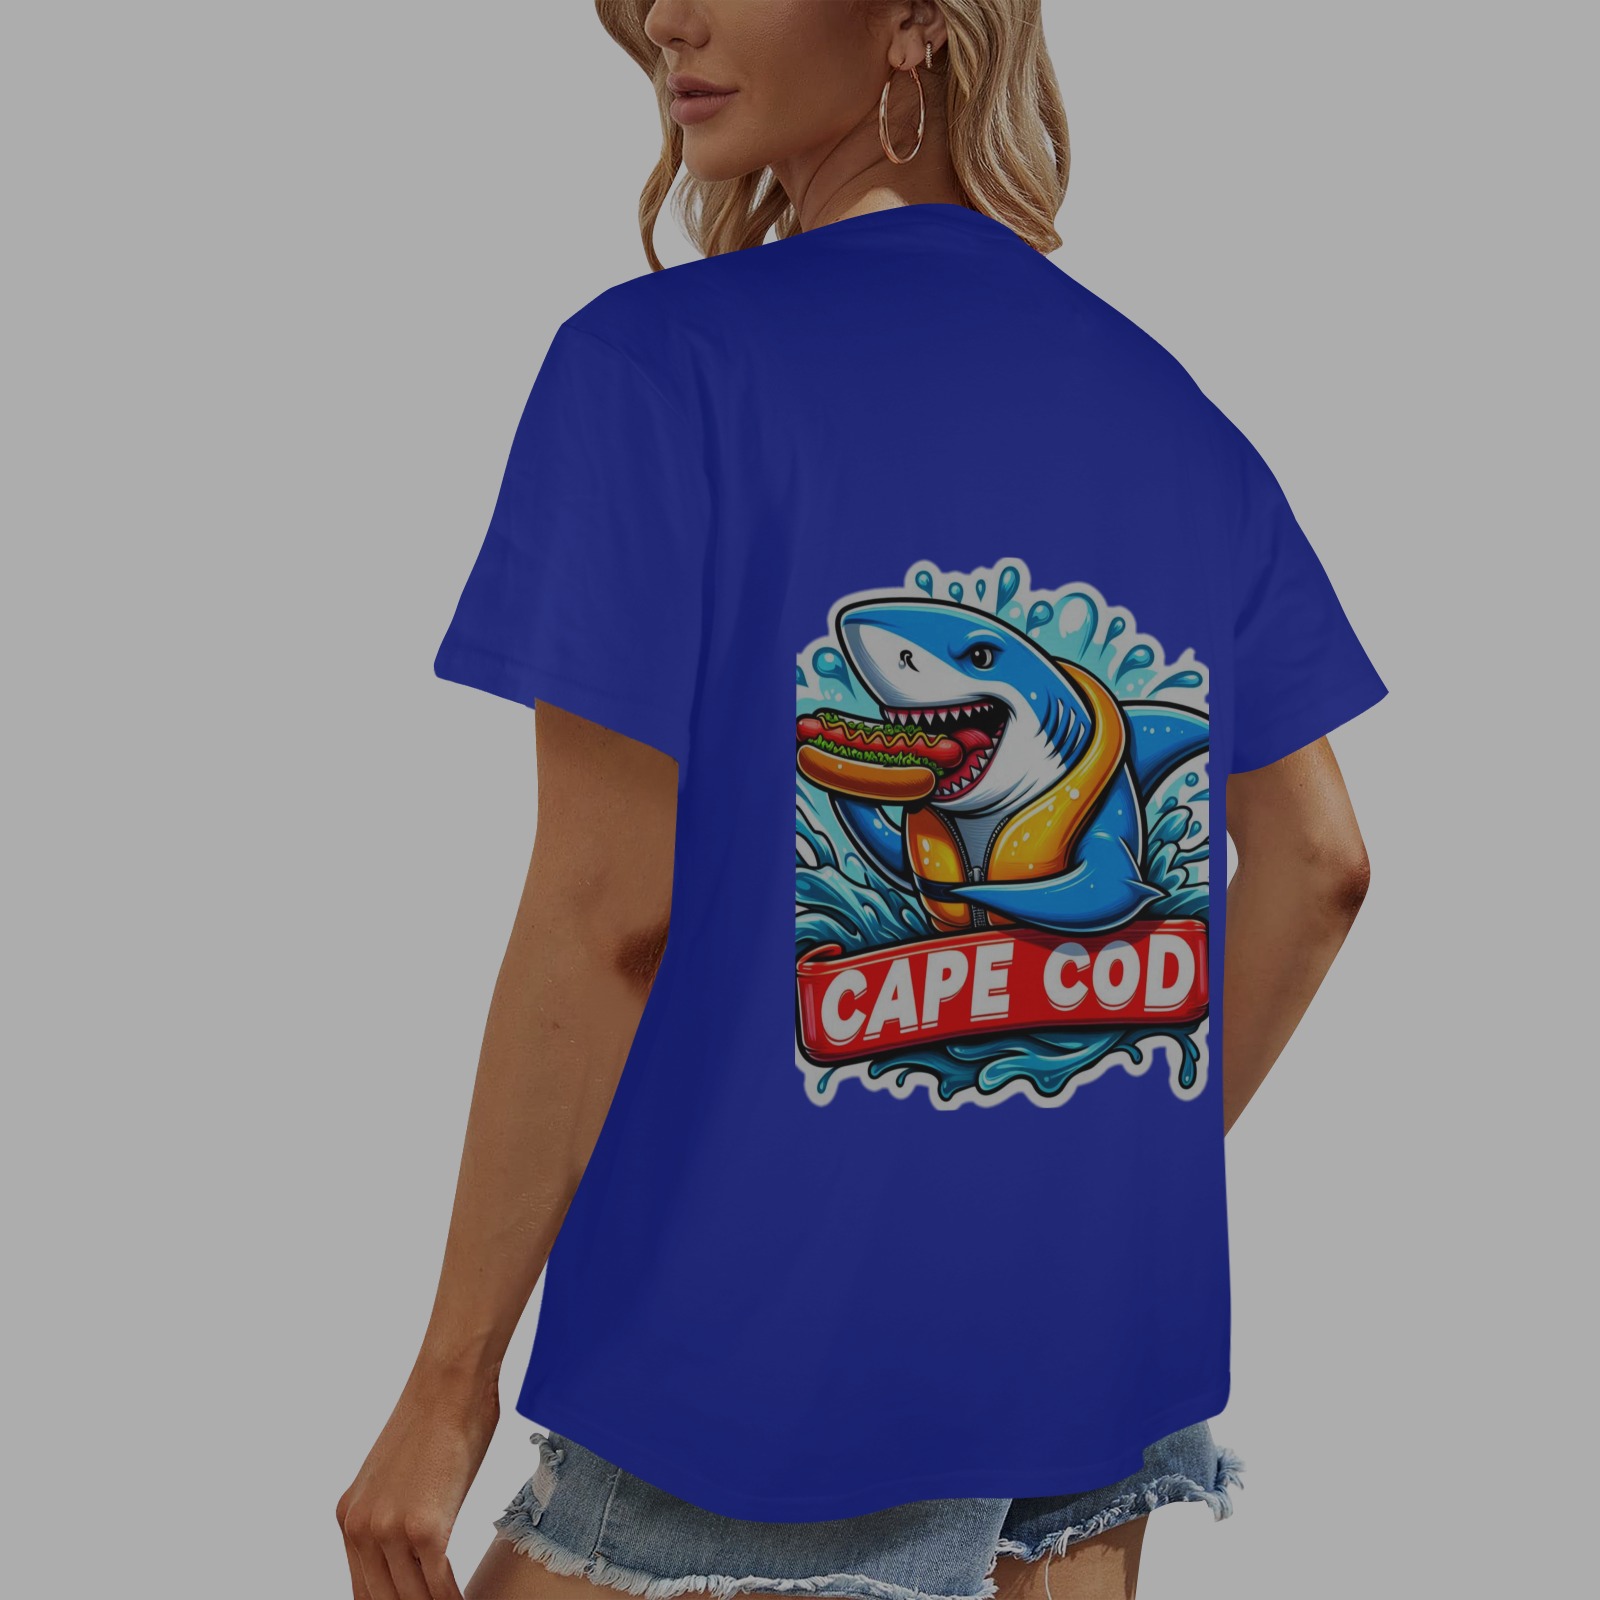 CAPE COD-GREAT WHITE EATING HOT DOG 3 Women's Glow in the Dark T-shirt (Two Sides Printing)